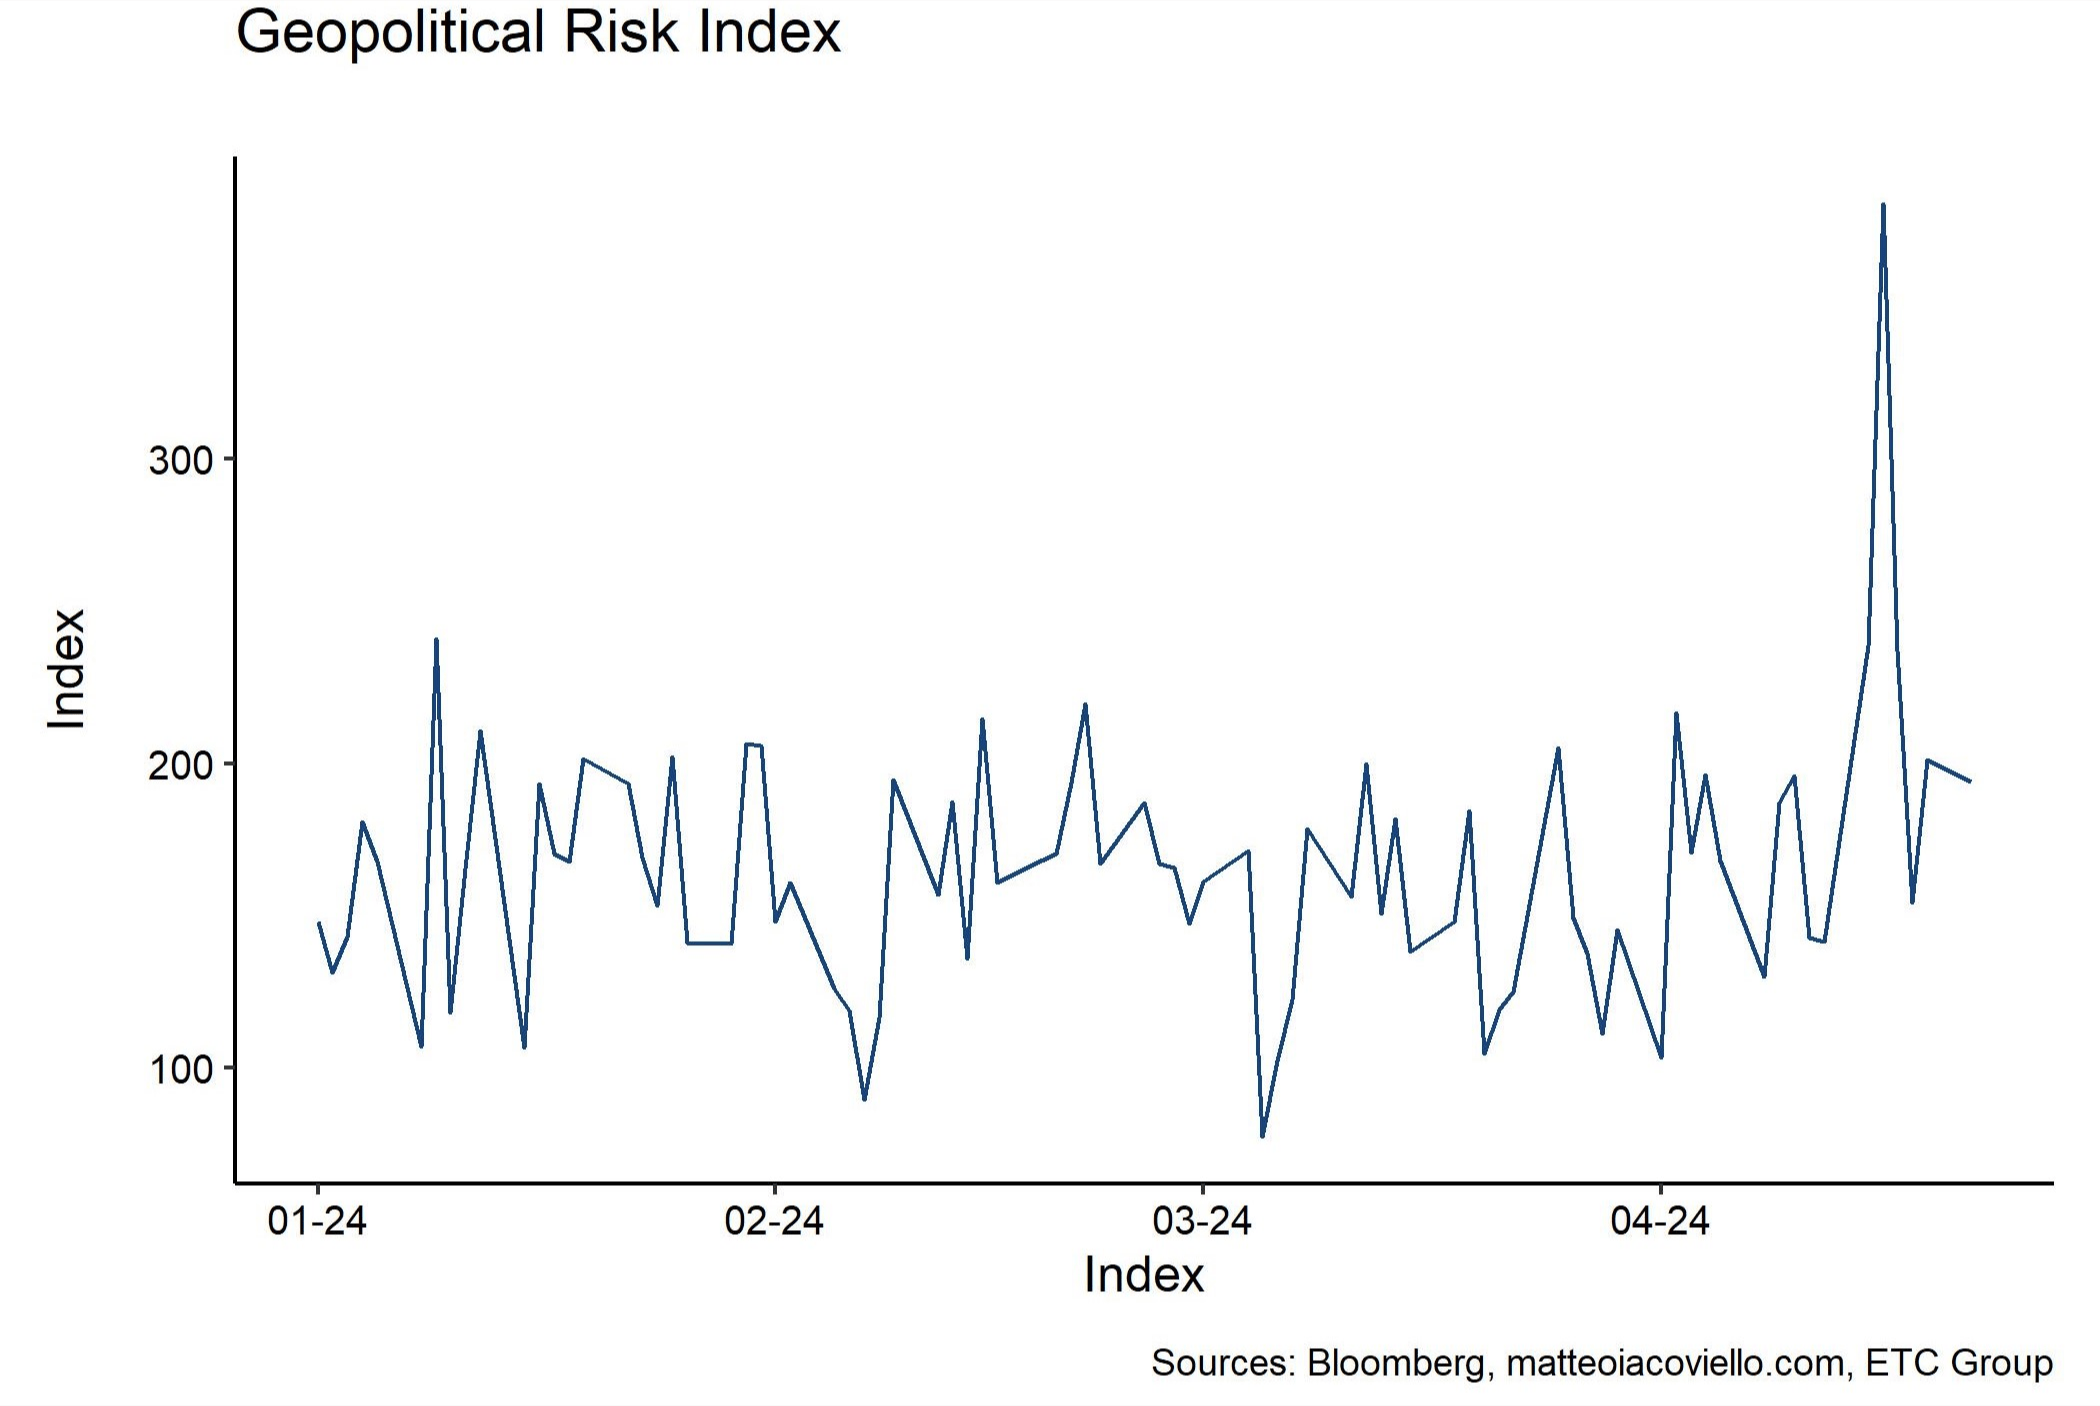 Bitcoin_Financial_Conditions_Geopolitical_Risks_3